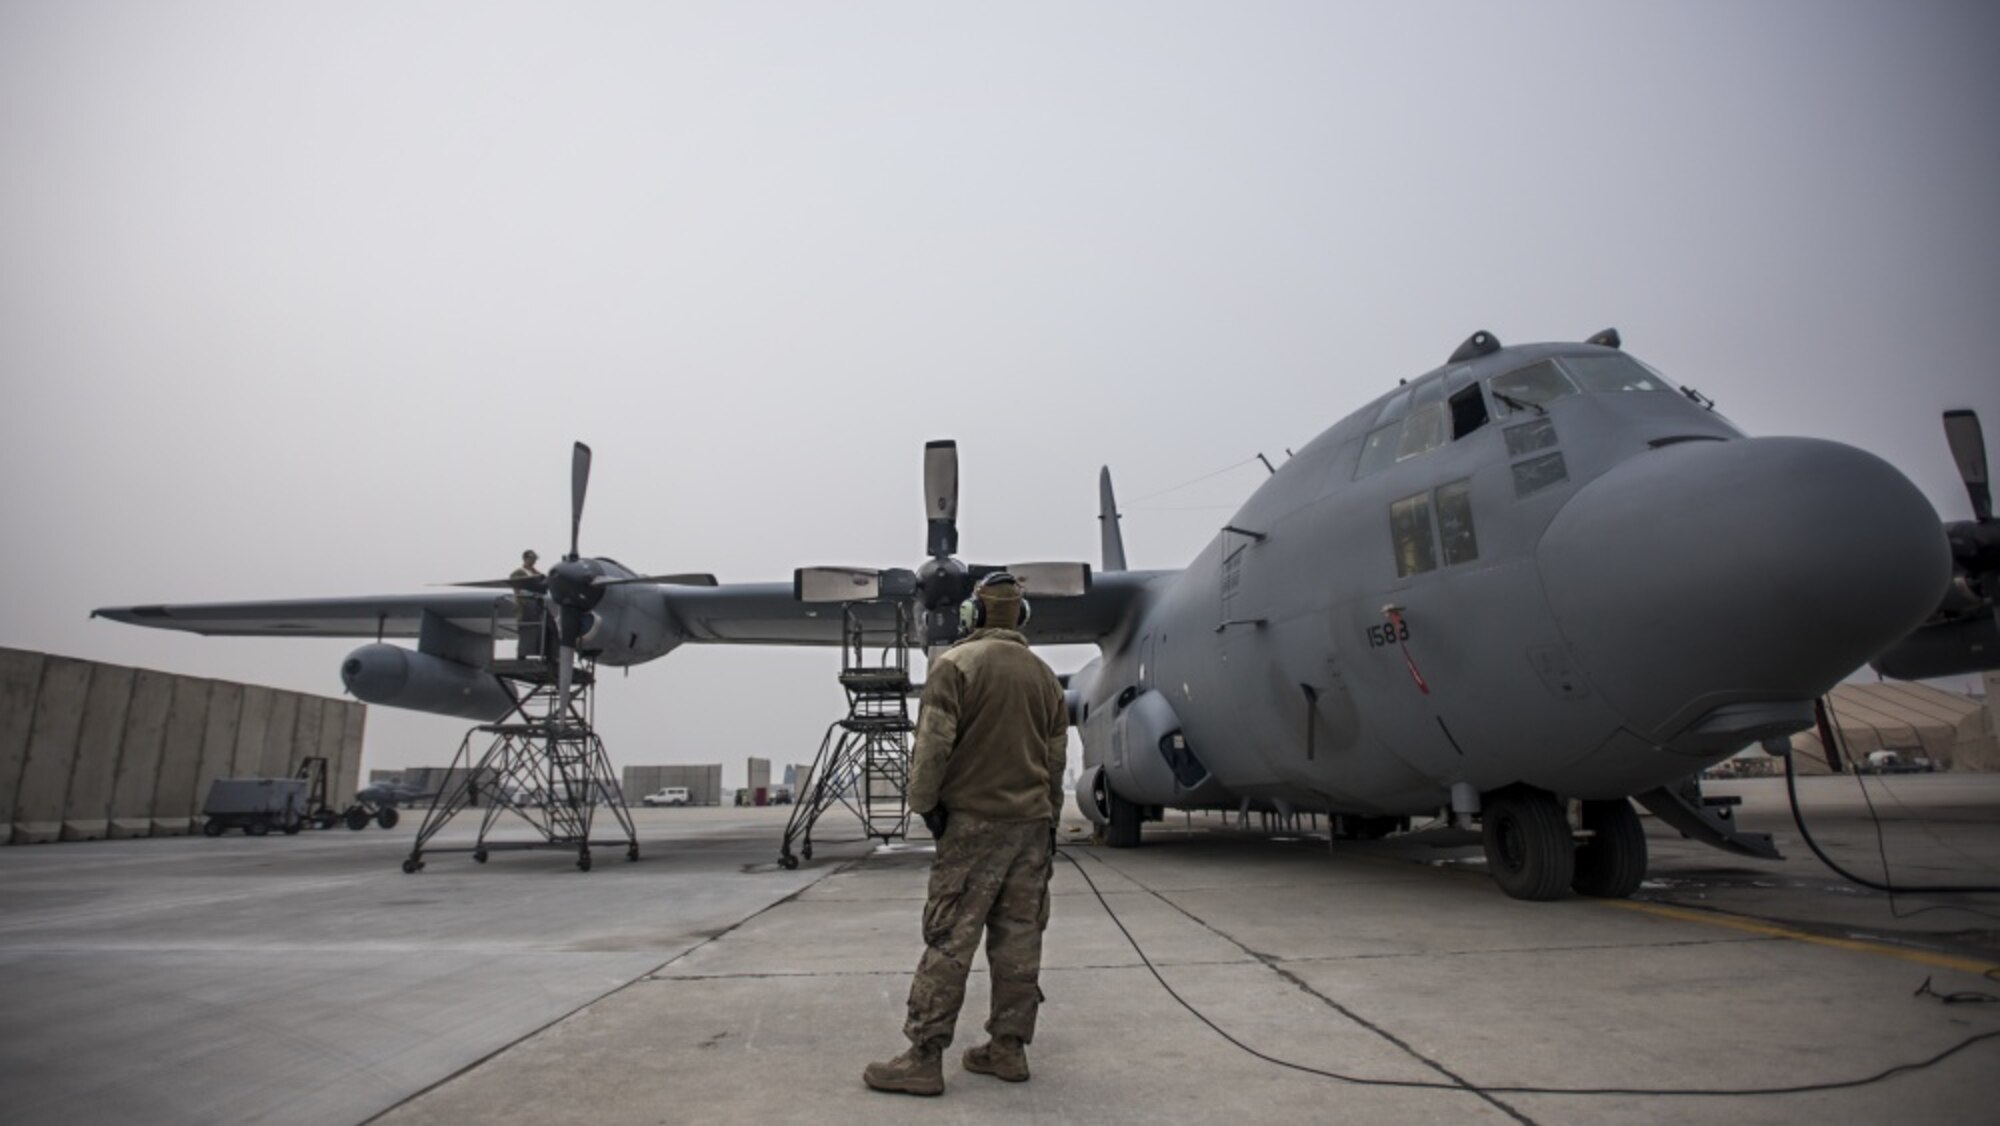 Staff Sgt. Kyle Poston, 455th Expeditionary Aircraft Maintenance Squadron crew chief, oversees engine maintenance on an EC-130 Compass Call Jan. 18, 2017 at Bagram Airfield, Afghanistan. To date, 41st EECS crews have flown over 39,000 hours during 6,800 combat sorties in support of Operation Enduring Freedom, and now the Resolute Support Mission. (U.S. Air Force photo by Staff Sgt. Katherine Spessa)